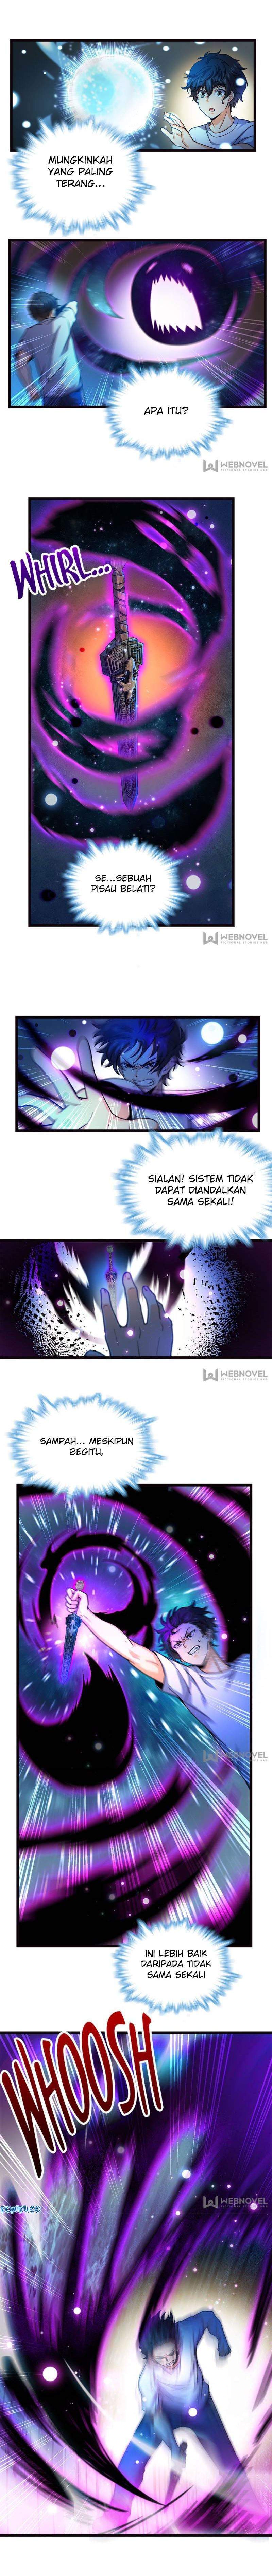 Spare Me, Great Lord! Chapter 16 Bahasa Indonesia